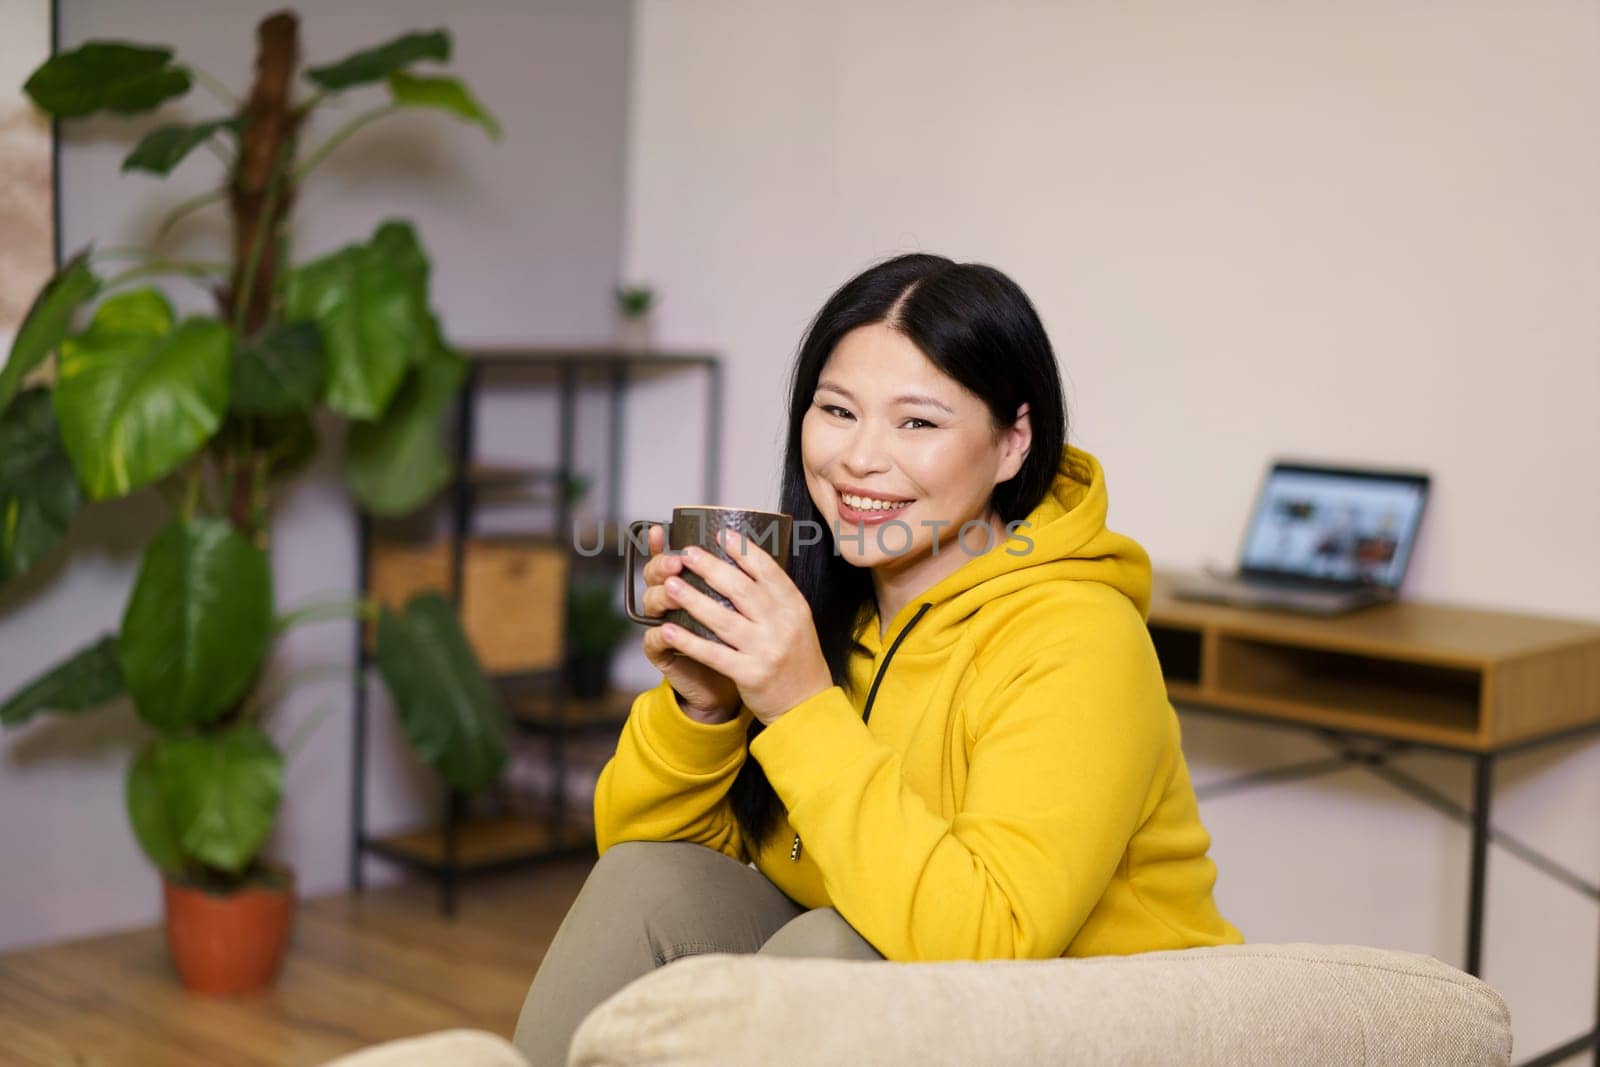 Cute Asian woman takes break from her online work at home to enjoy a soothing cup of tea. The image captures the balance of work and leisure in her comfortable indoor space, surrounded by the calm and serenity of nature. High quality photo